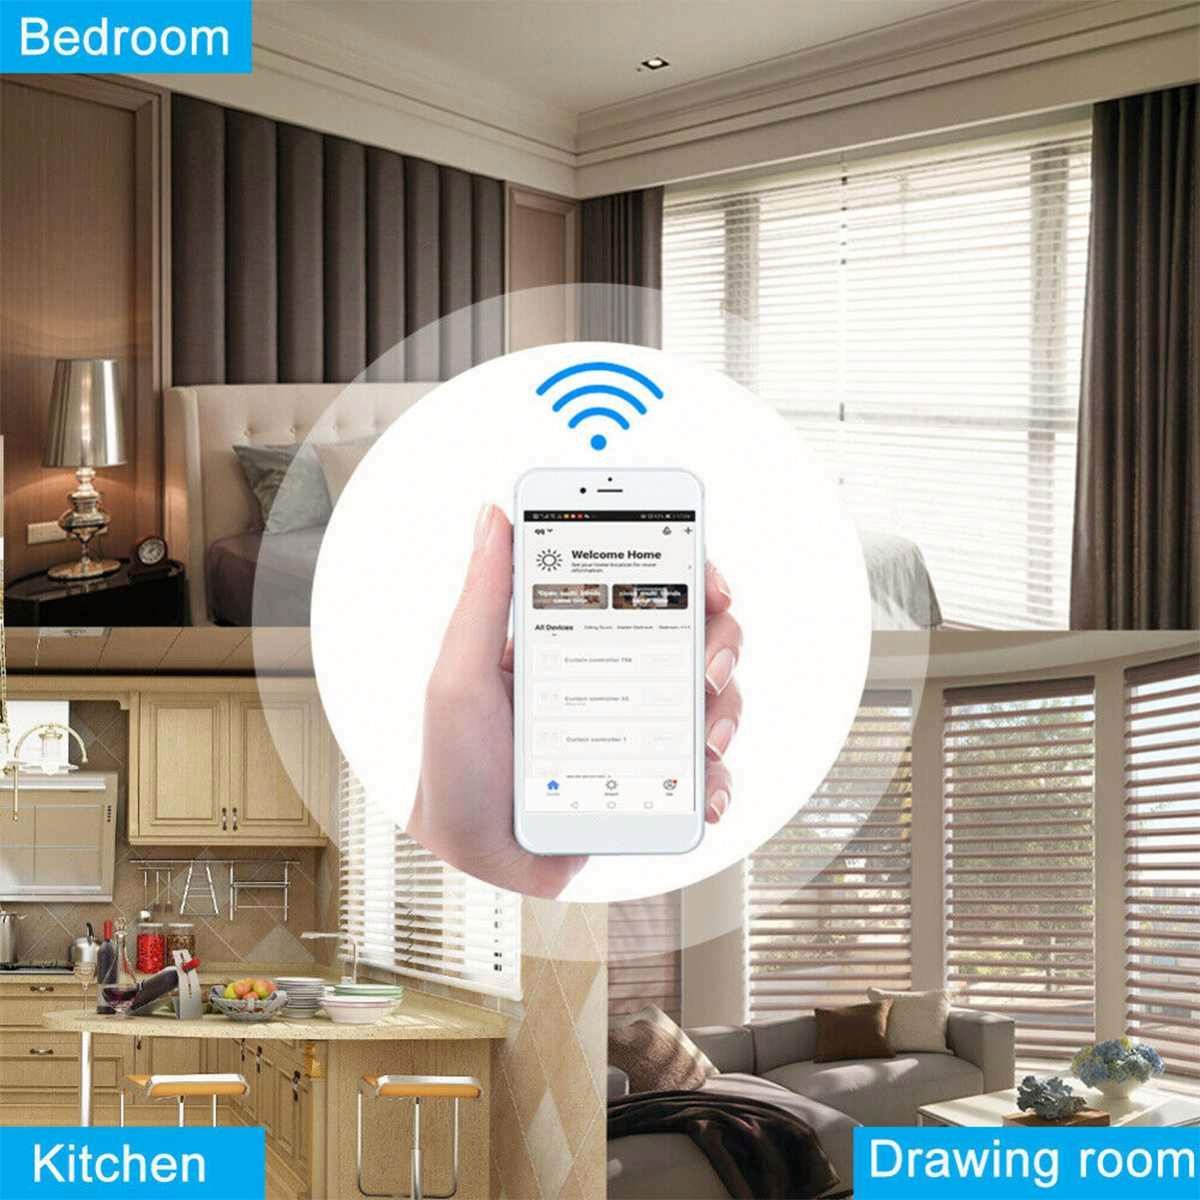 Smart curtain motor can control different curtains in different rooms. as long as they are connected to the smart app